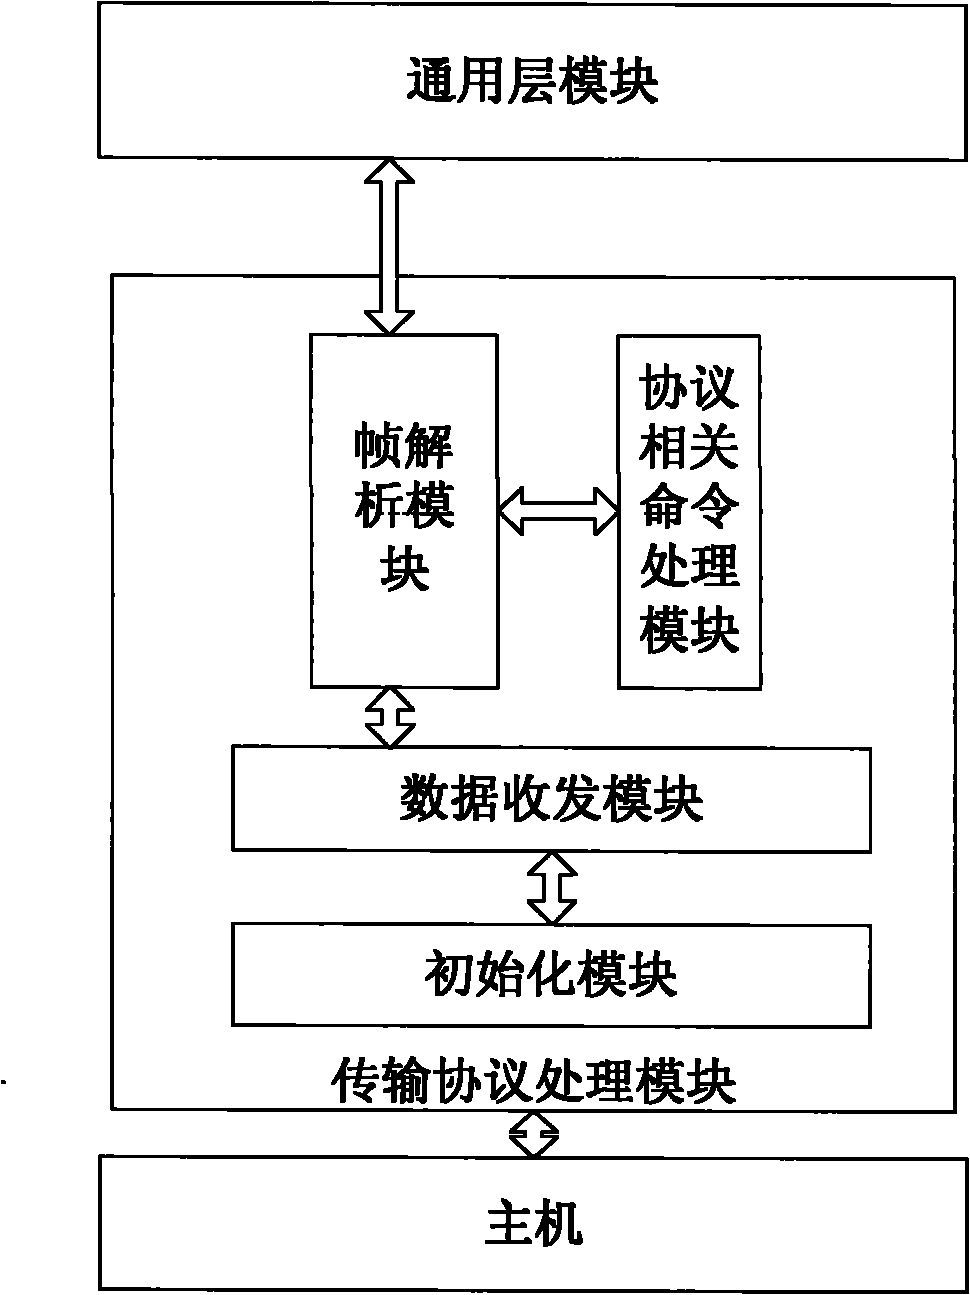 Driving system and method for network storage target end